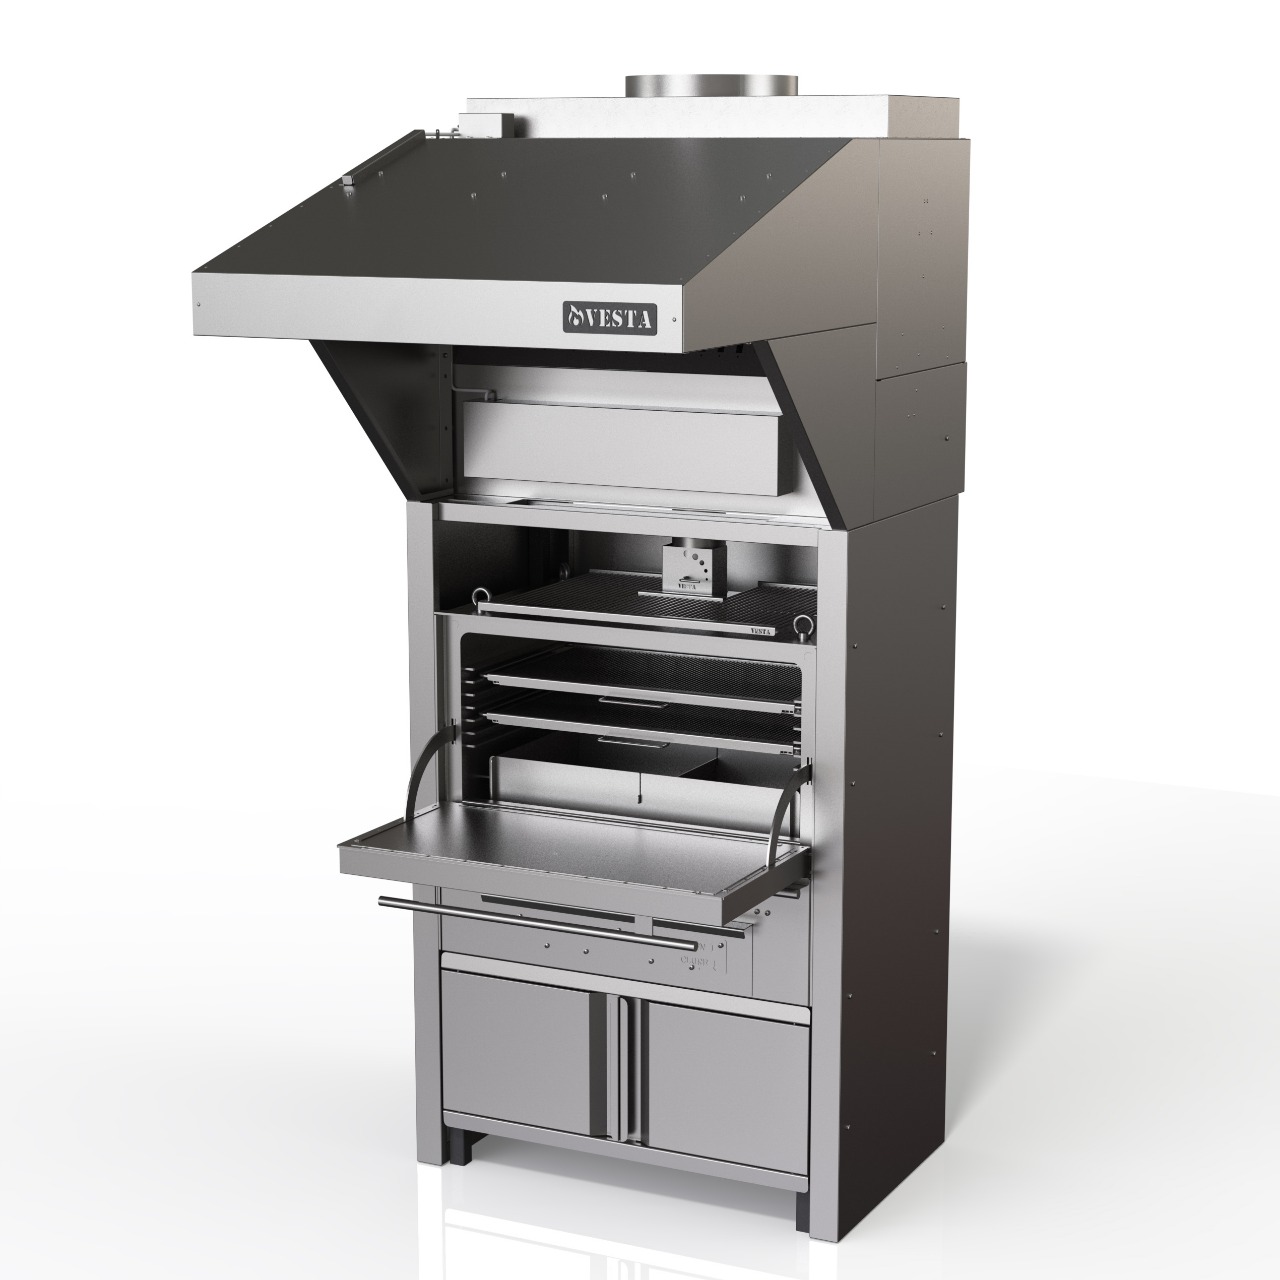 VESTA 45 SS - closed charcoal grill with stand and sparkarrestor